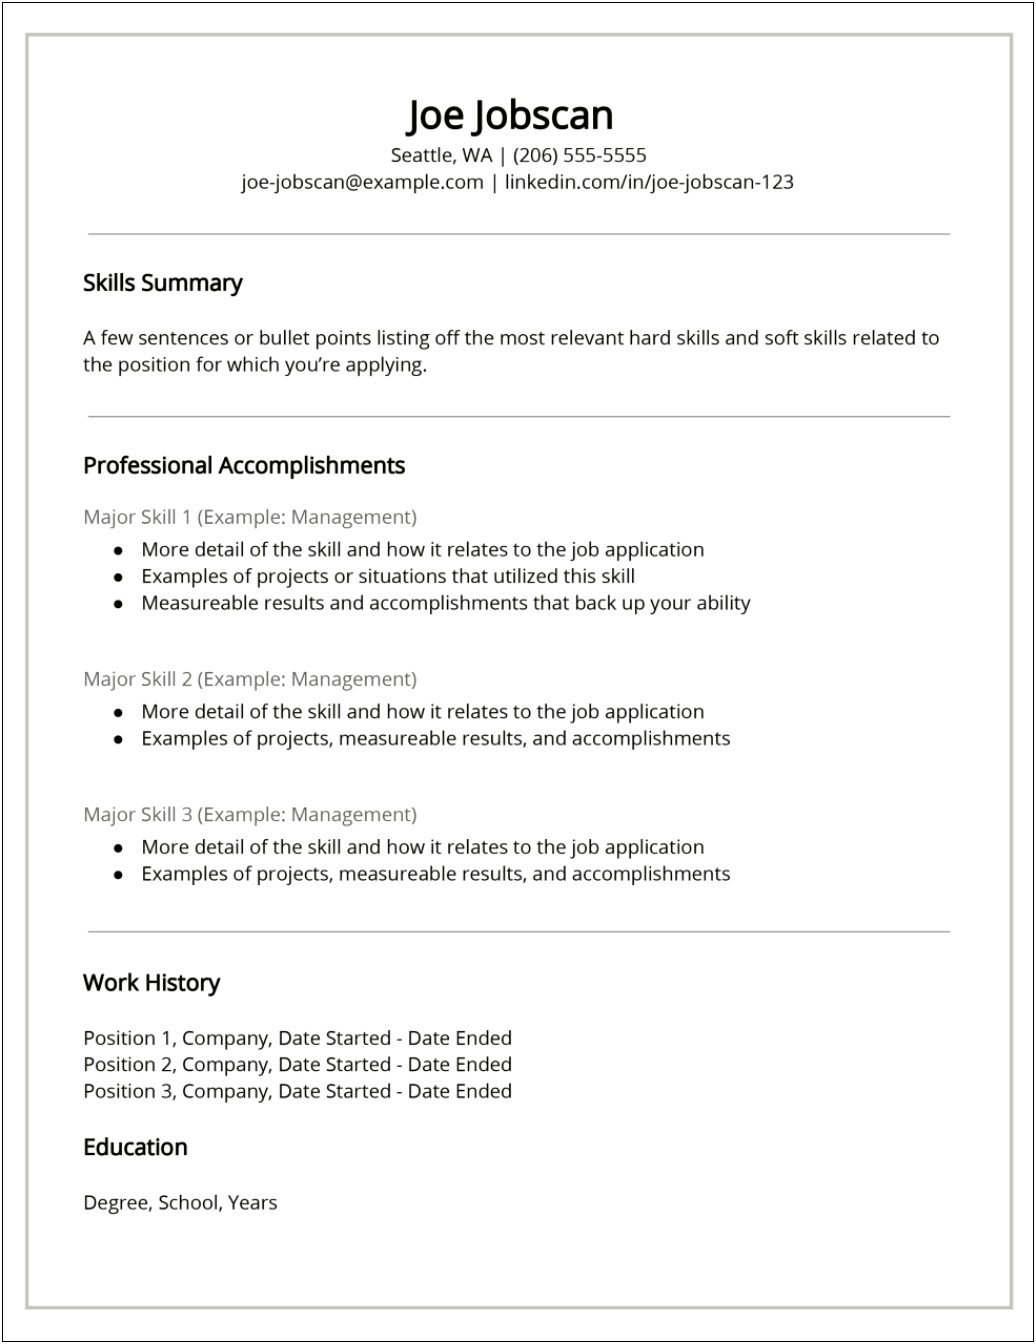 Qualifications Summary Section In Functional Resume